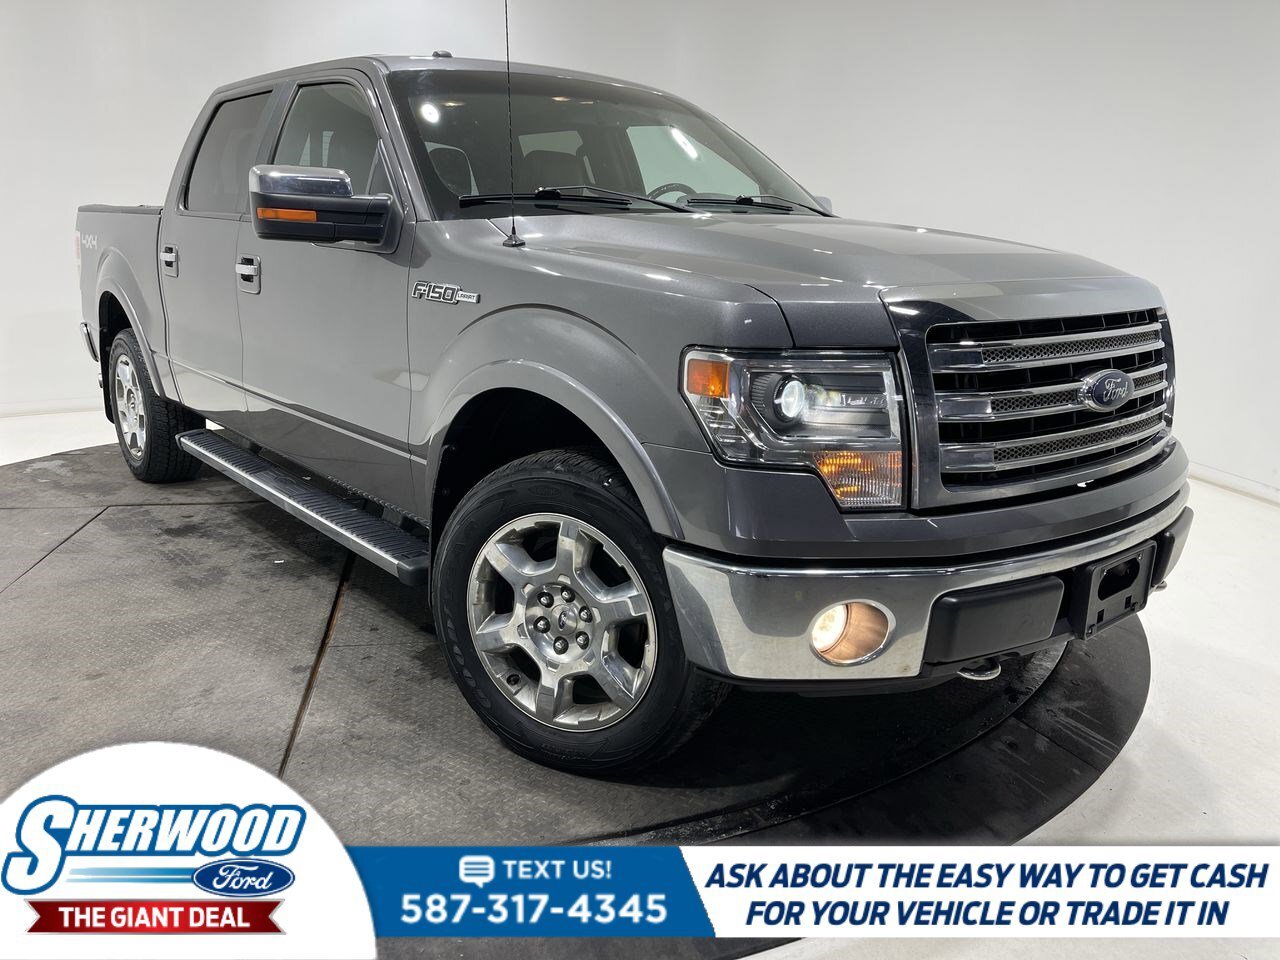 2013 Ford F-150 Lariat- $0 Down $204 Weekly- LEATHER- MOONROOF